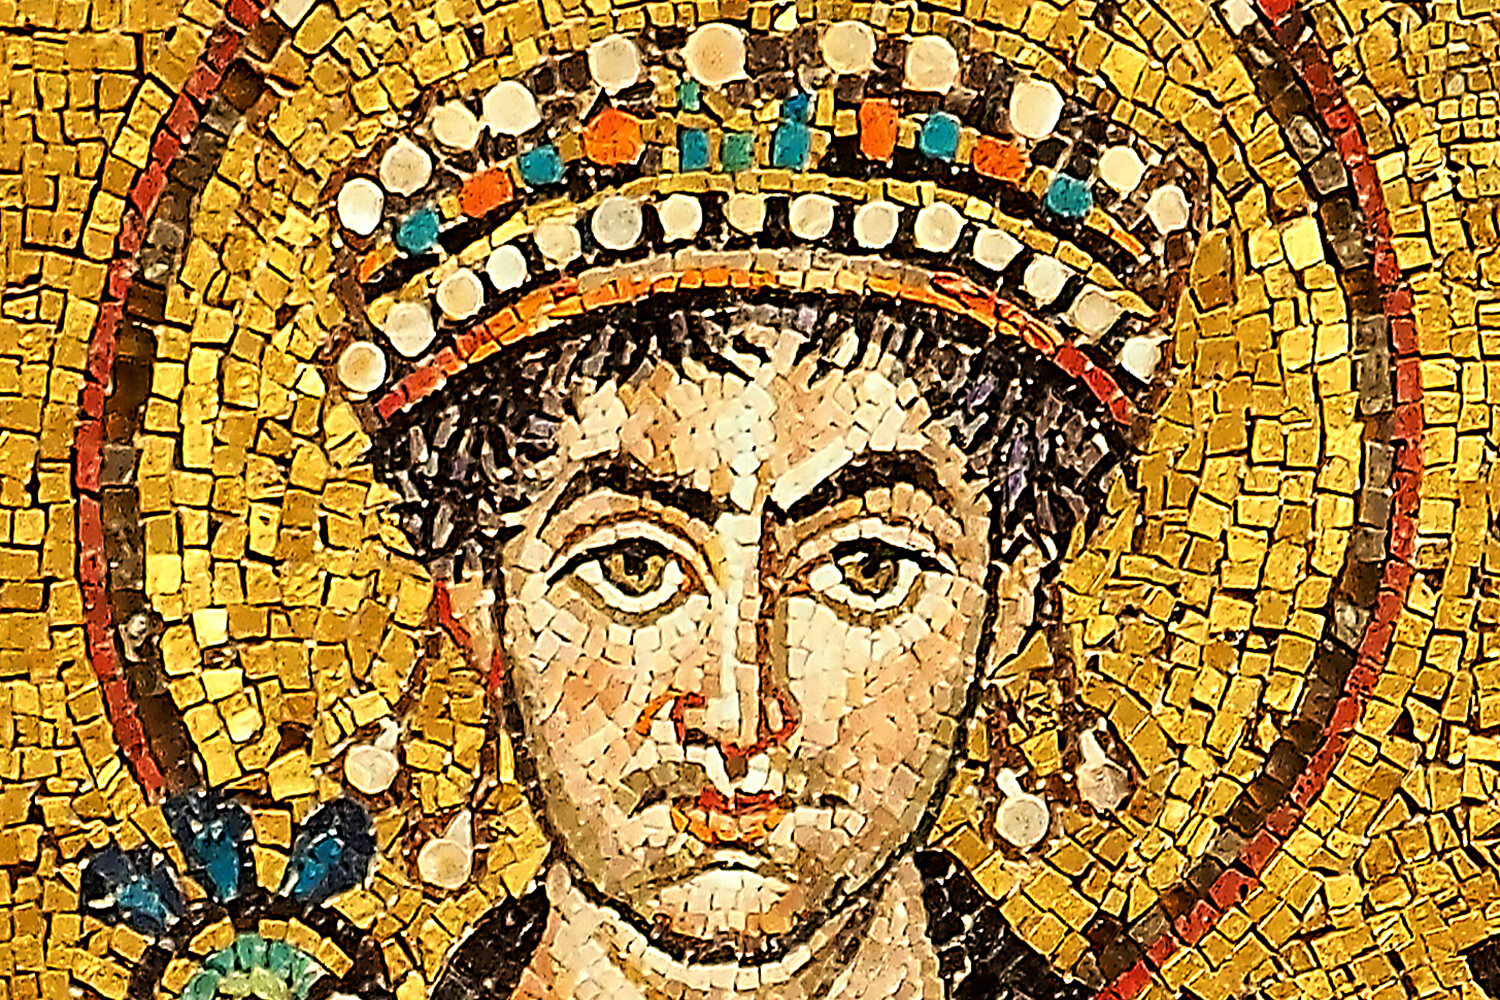 Byzantium and the Abbasids: Best of Enemies